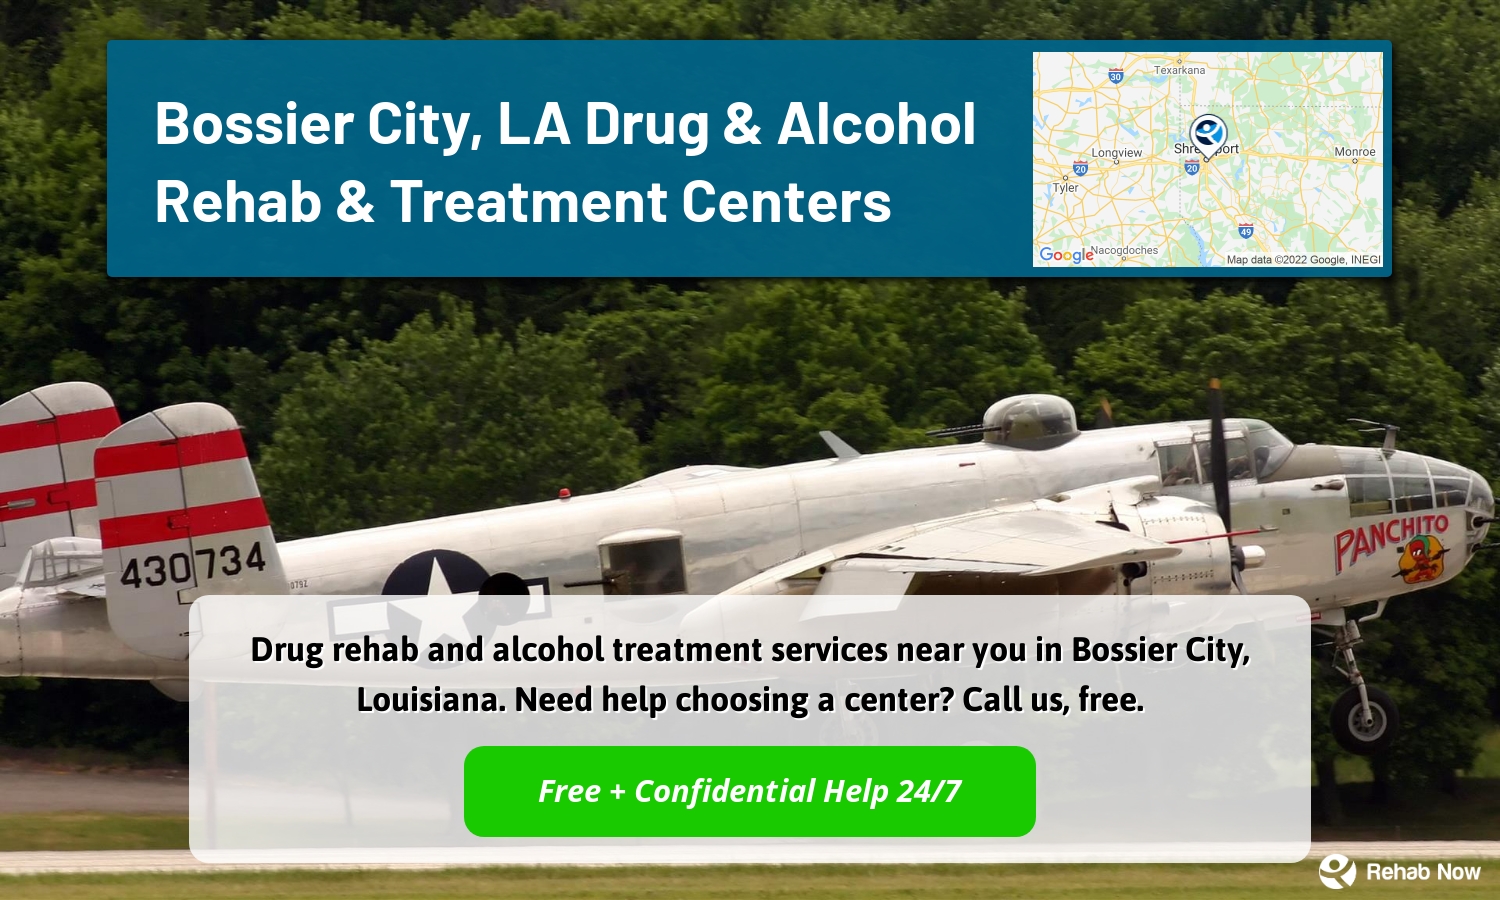 Drug rehab and alcohol treatment services near you in Bossier City, Louisiana. Need help choosing a center? Call us, free.